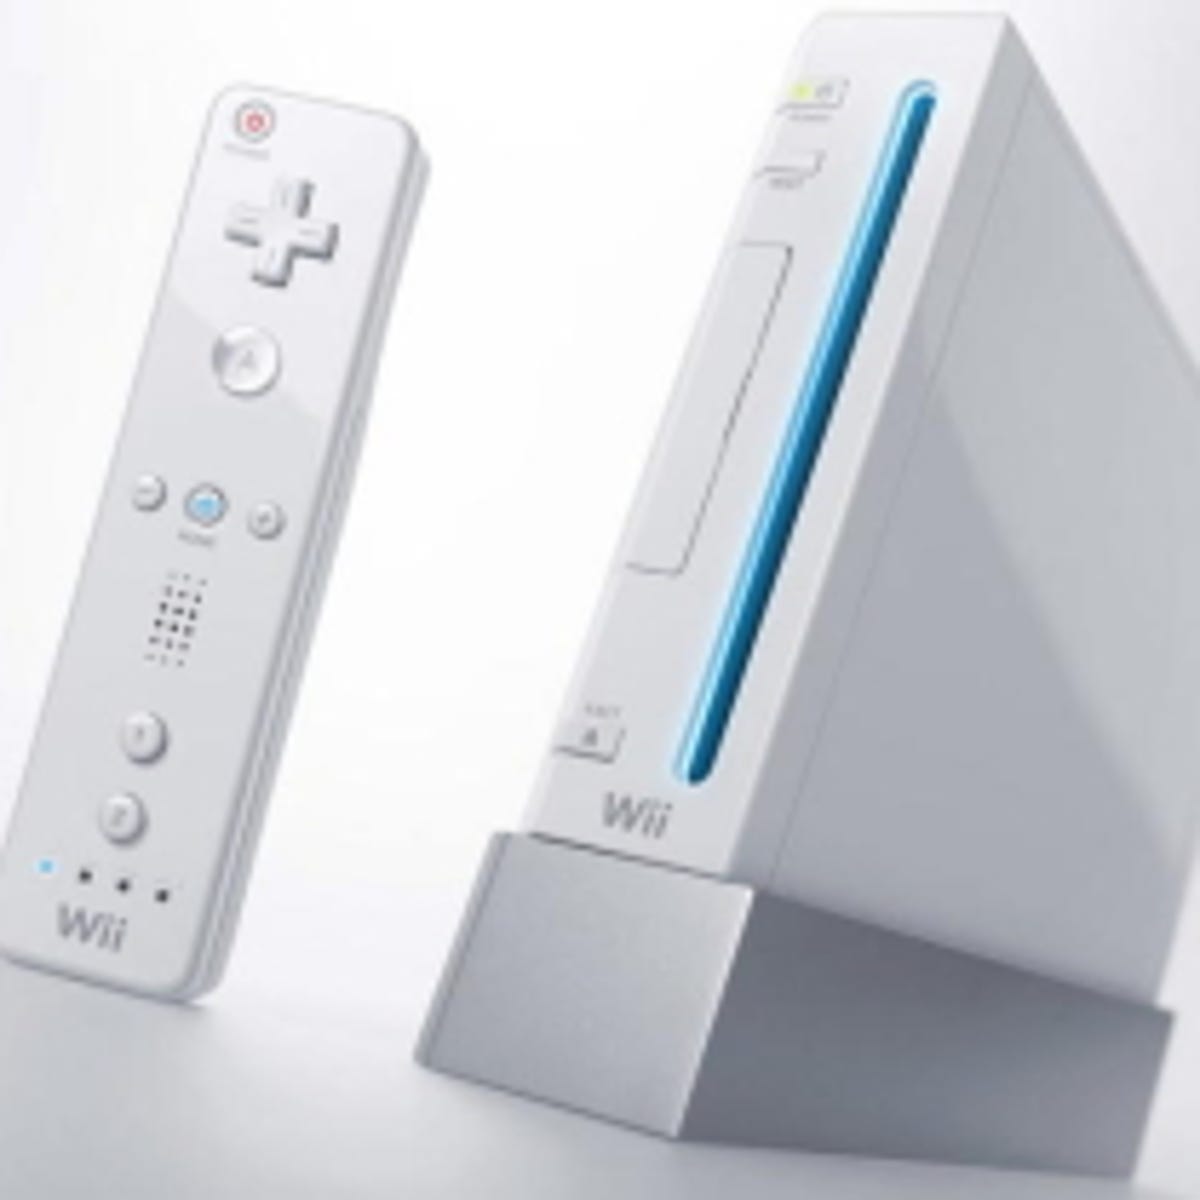 Nintendo's Wii U sales hit new low, at 160K for Q1 2013